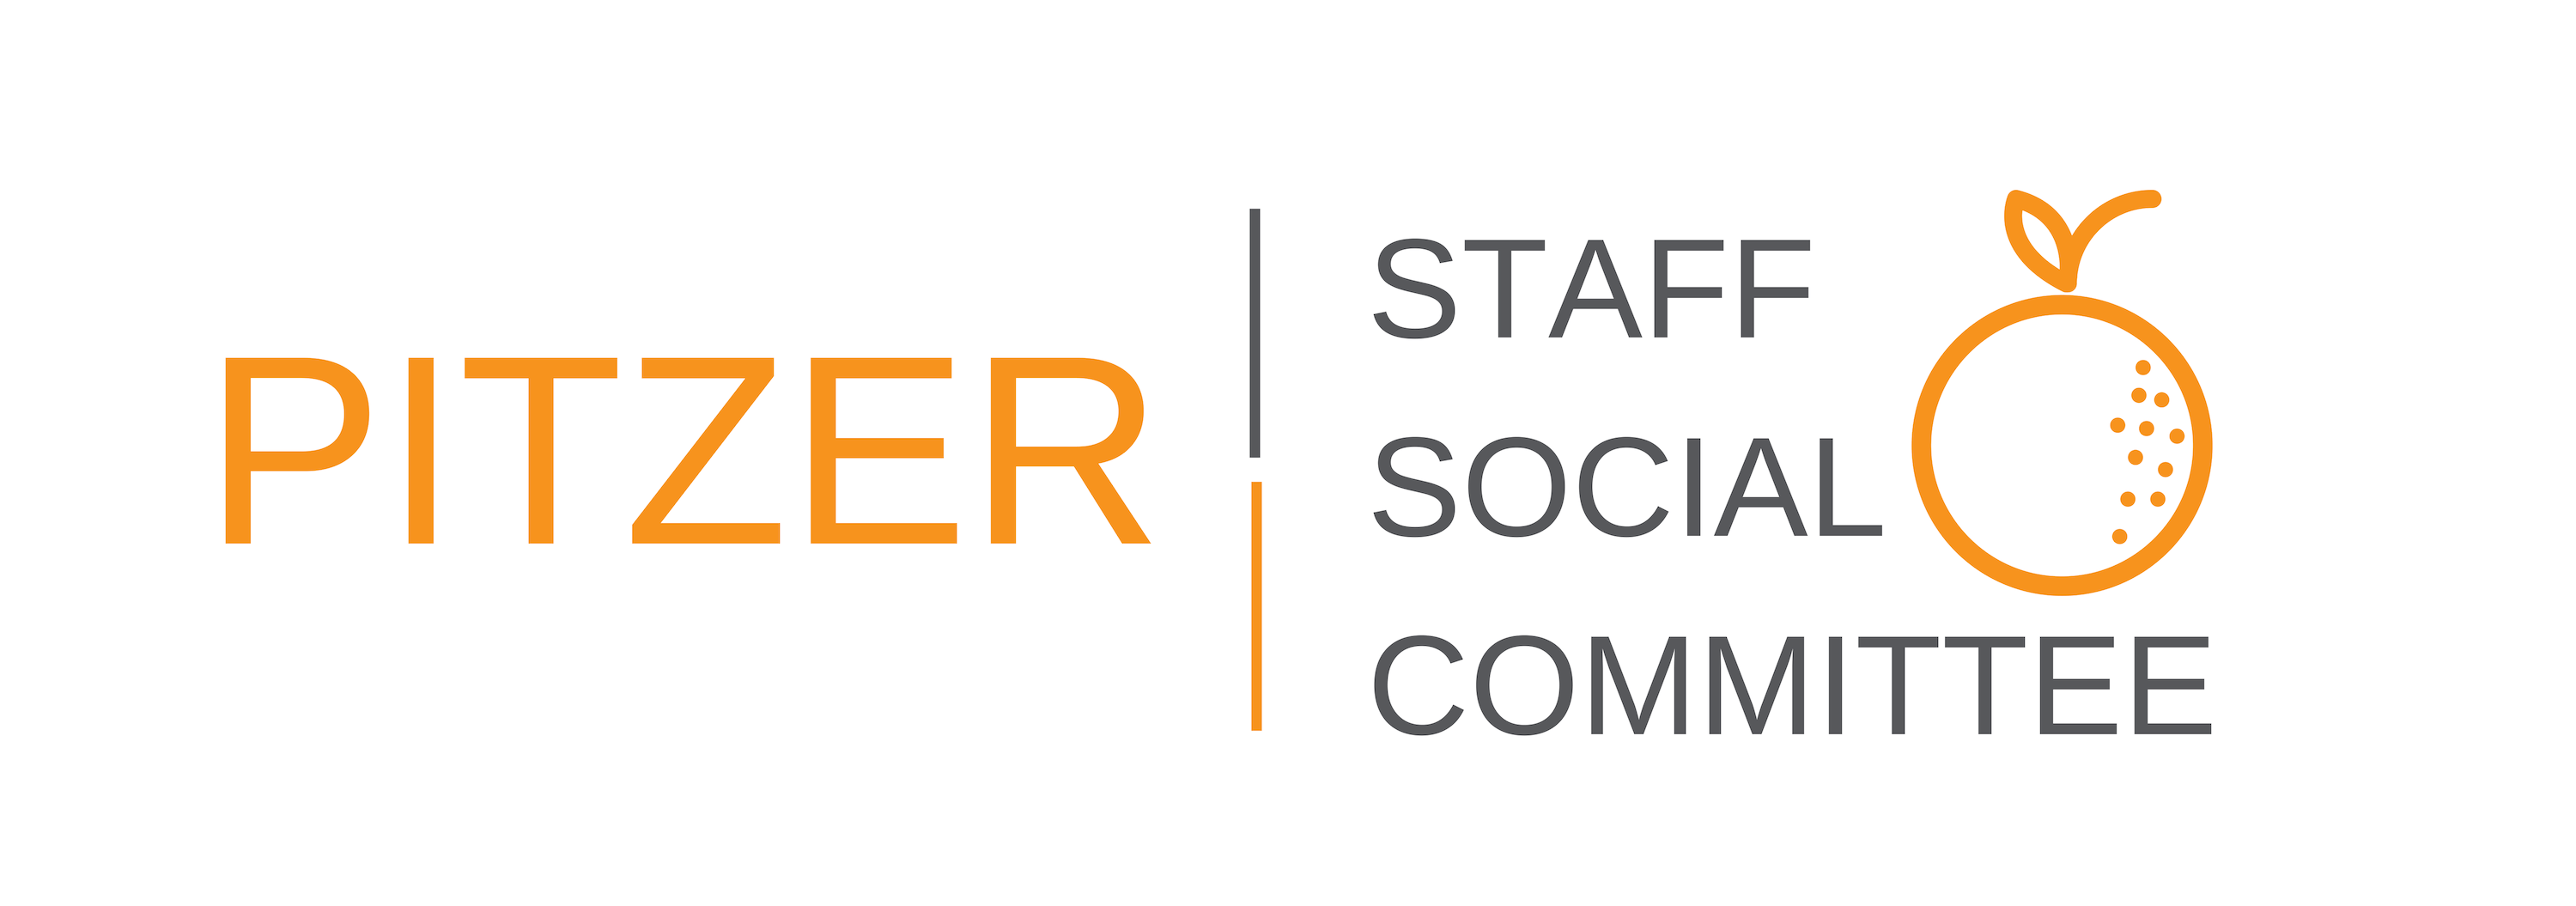 Social Committee Logo - Pitzer Staff Social Committee